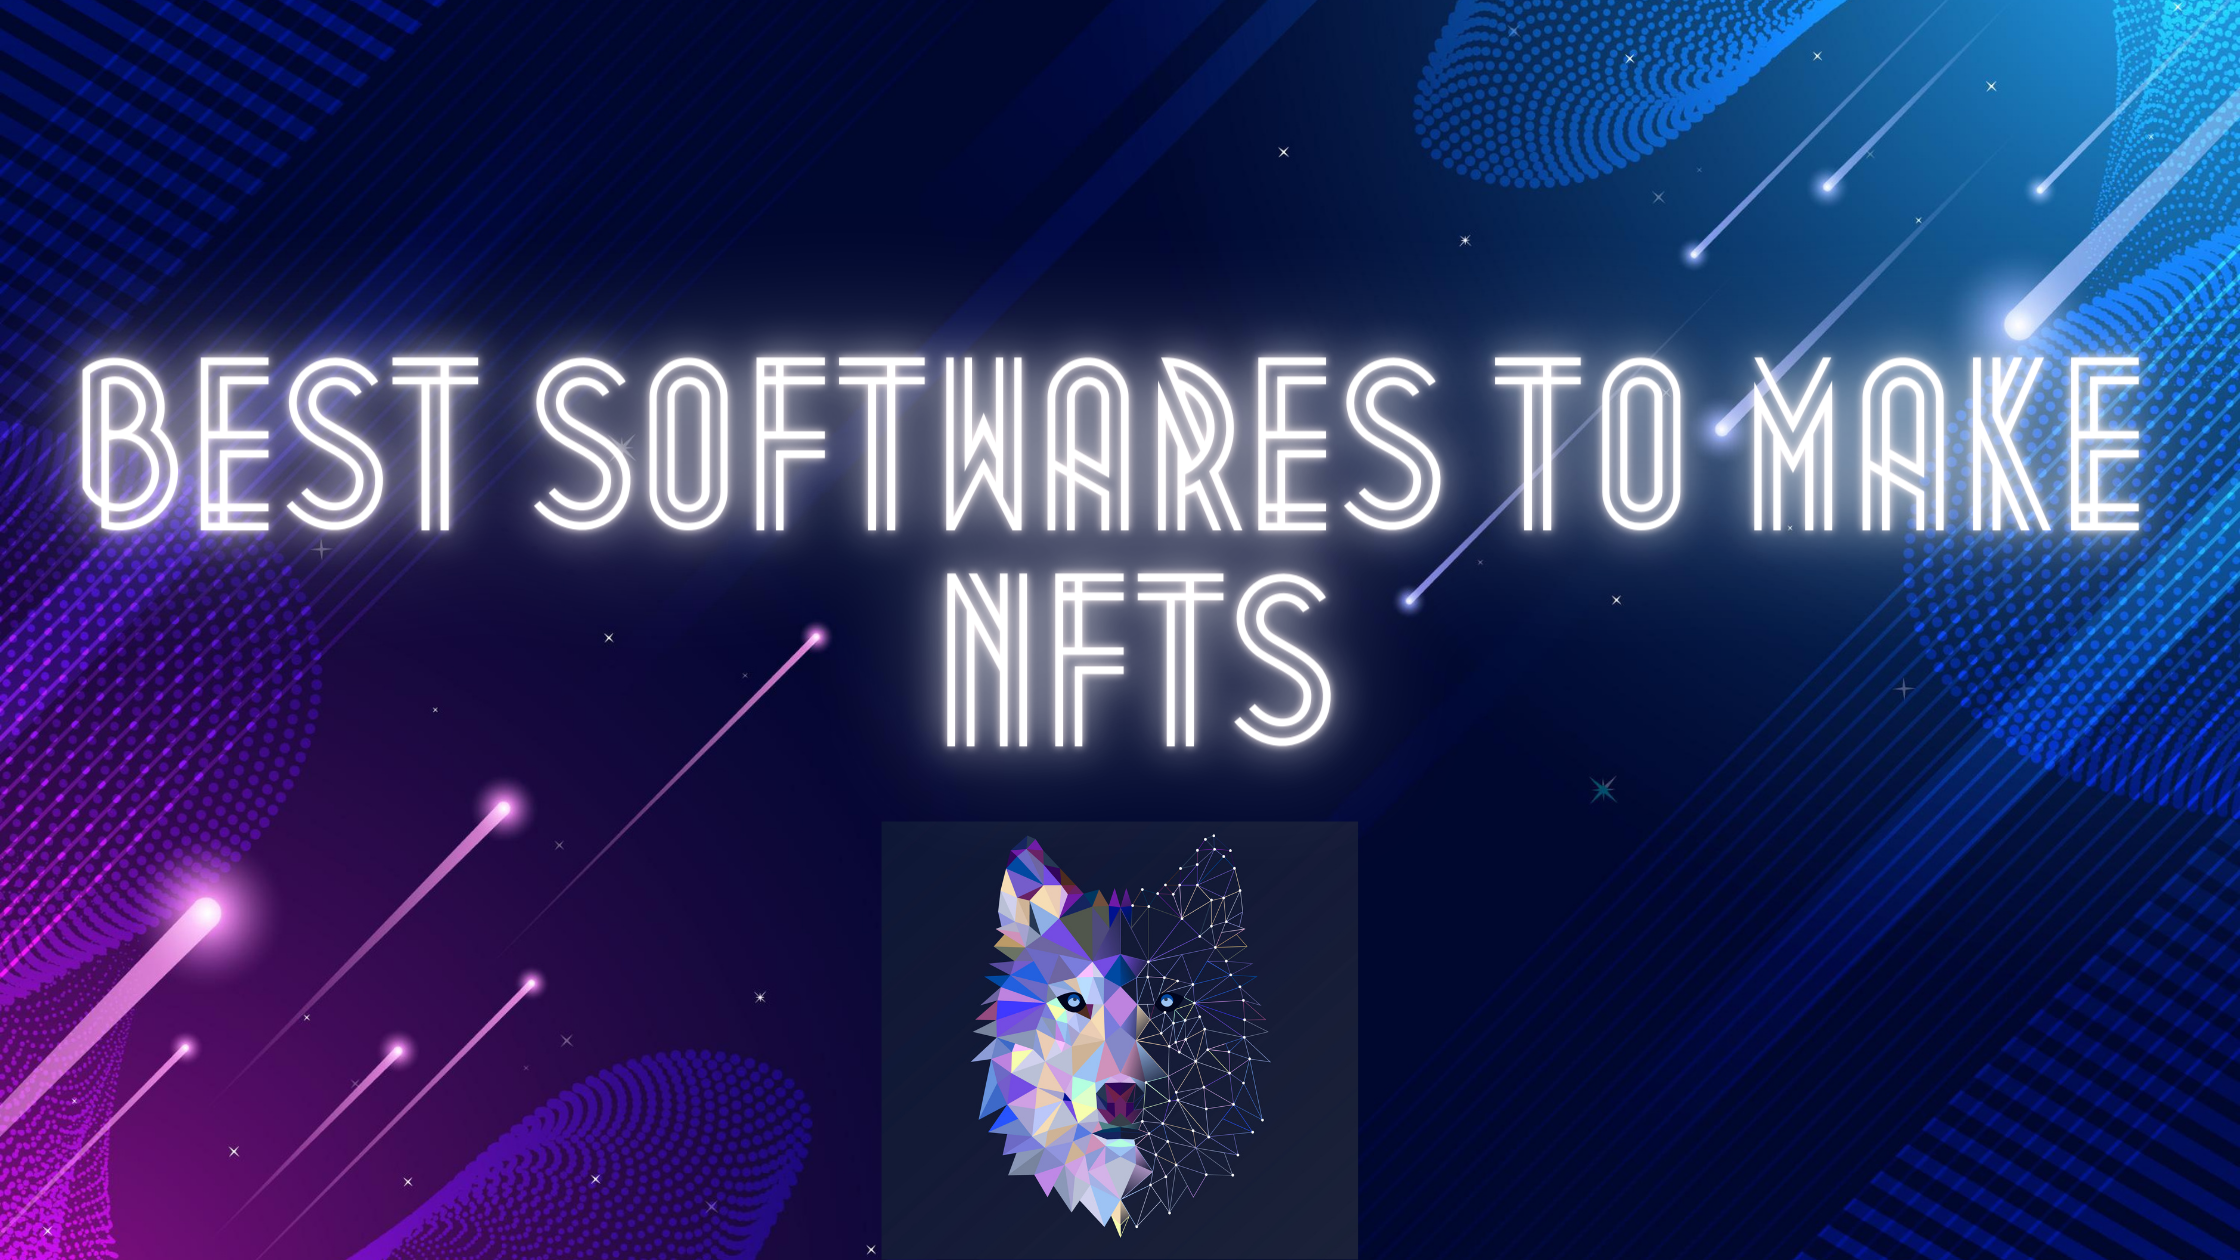 Five Best Softwares To Make NFT In 2022